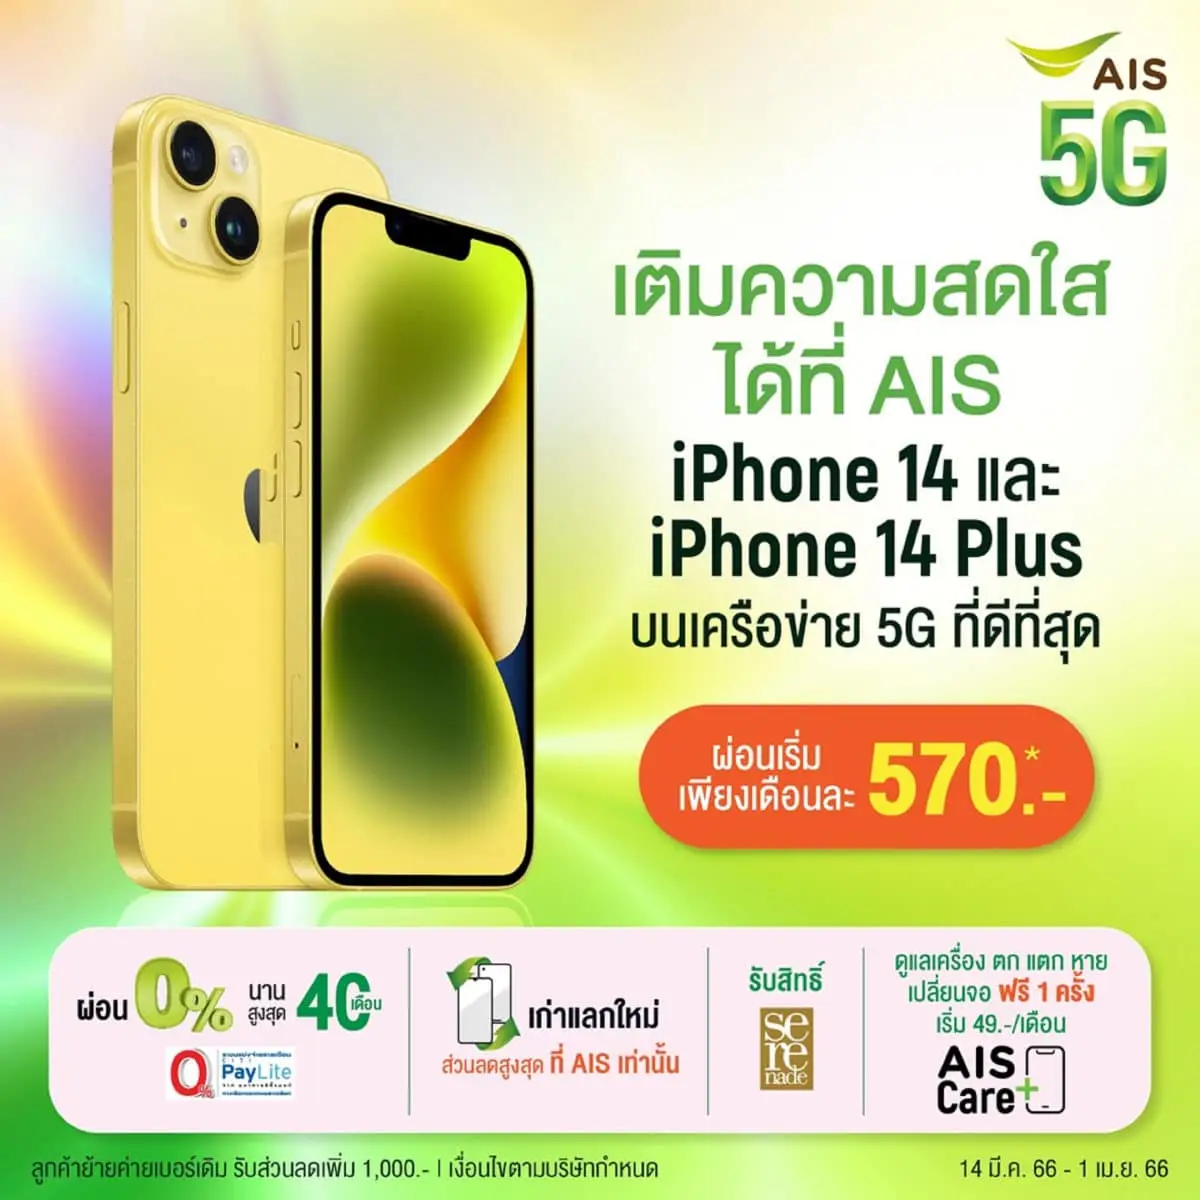 AIS iPhone 14 and iPhone 14 Plus New colour Yellow